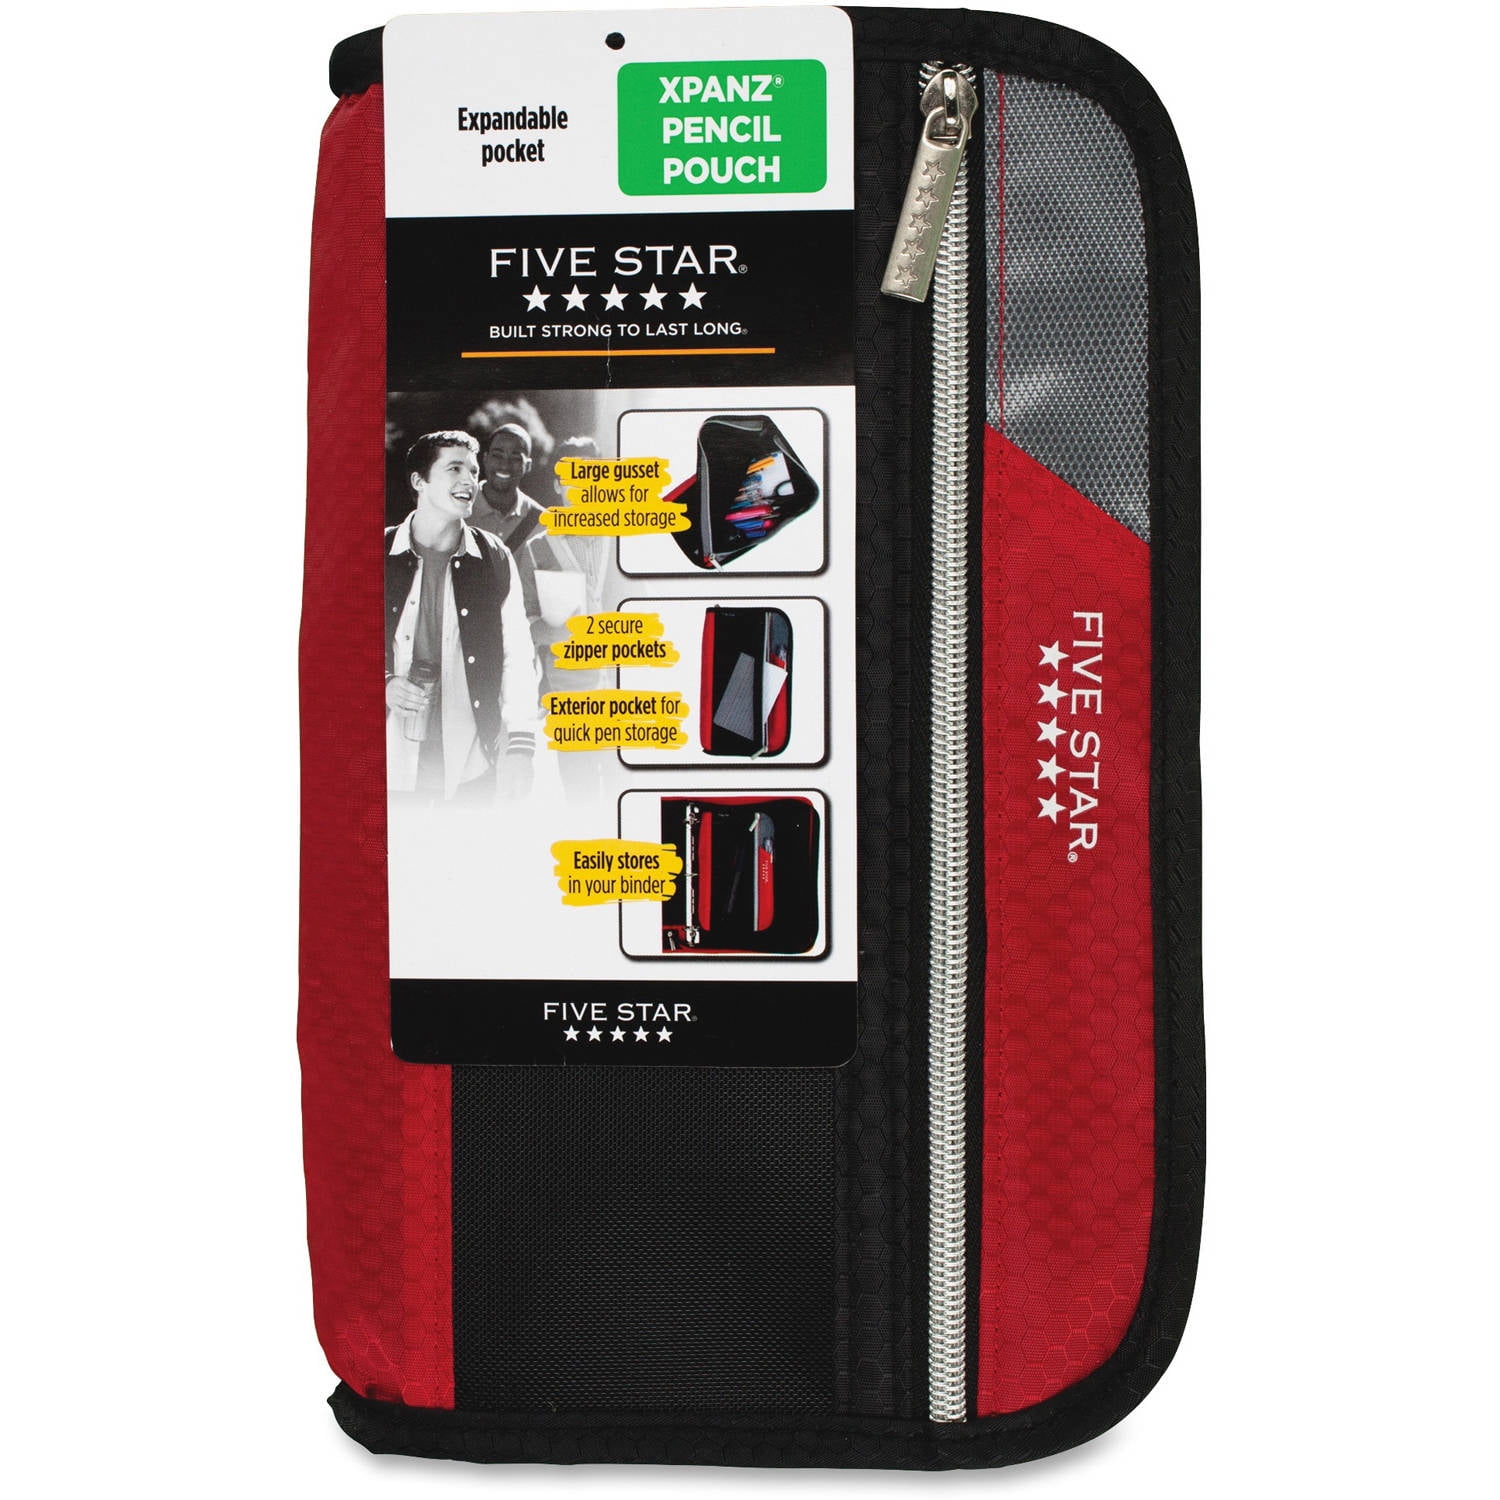 Five Star Xpanz Carrying Case (pouch) For Pencil, Pen, Supplies - Assorted, Price/EA